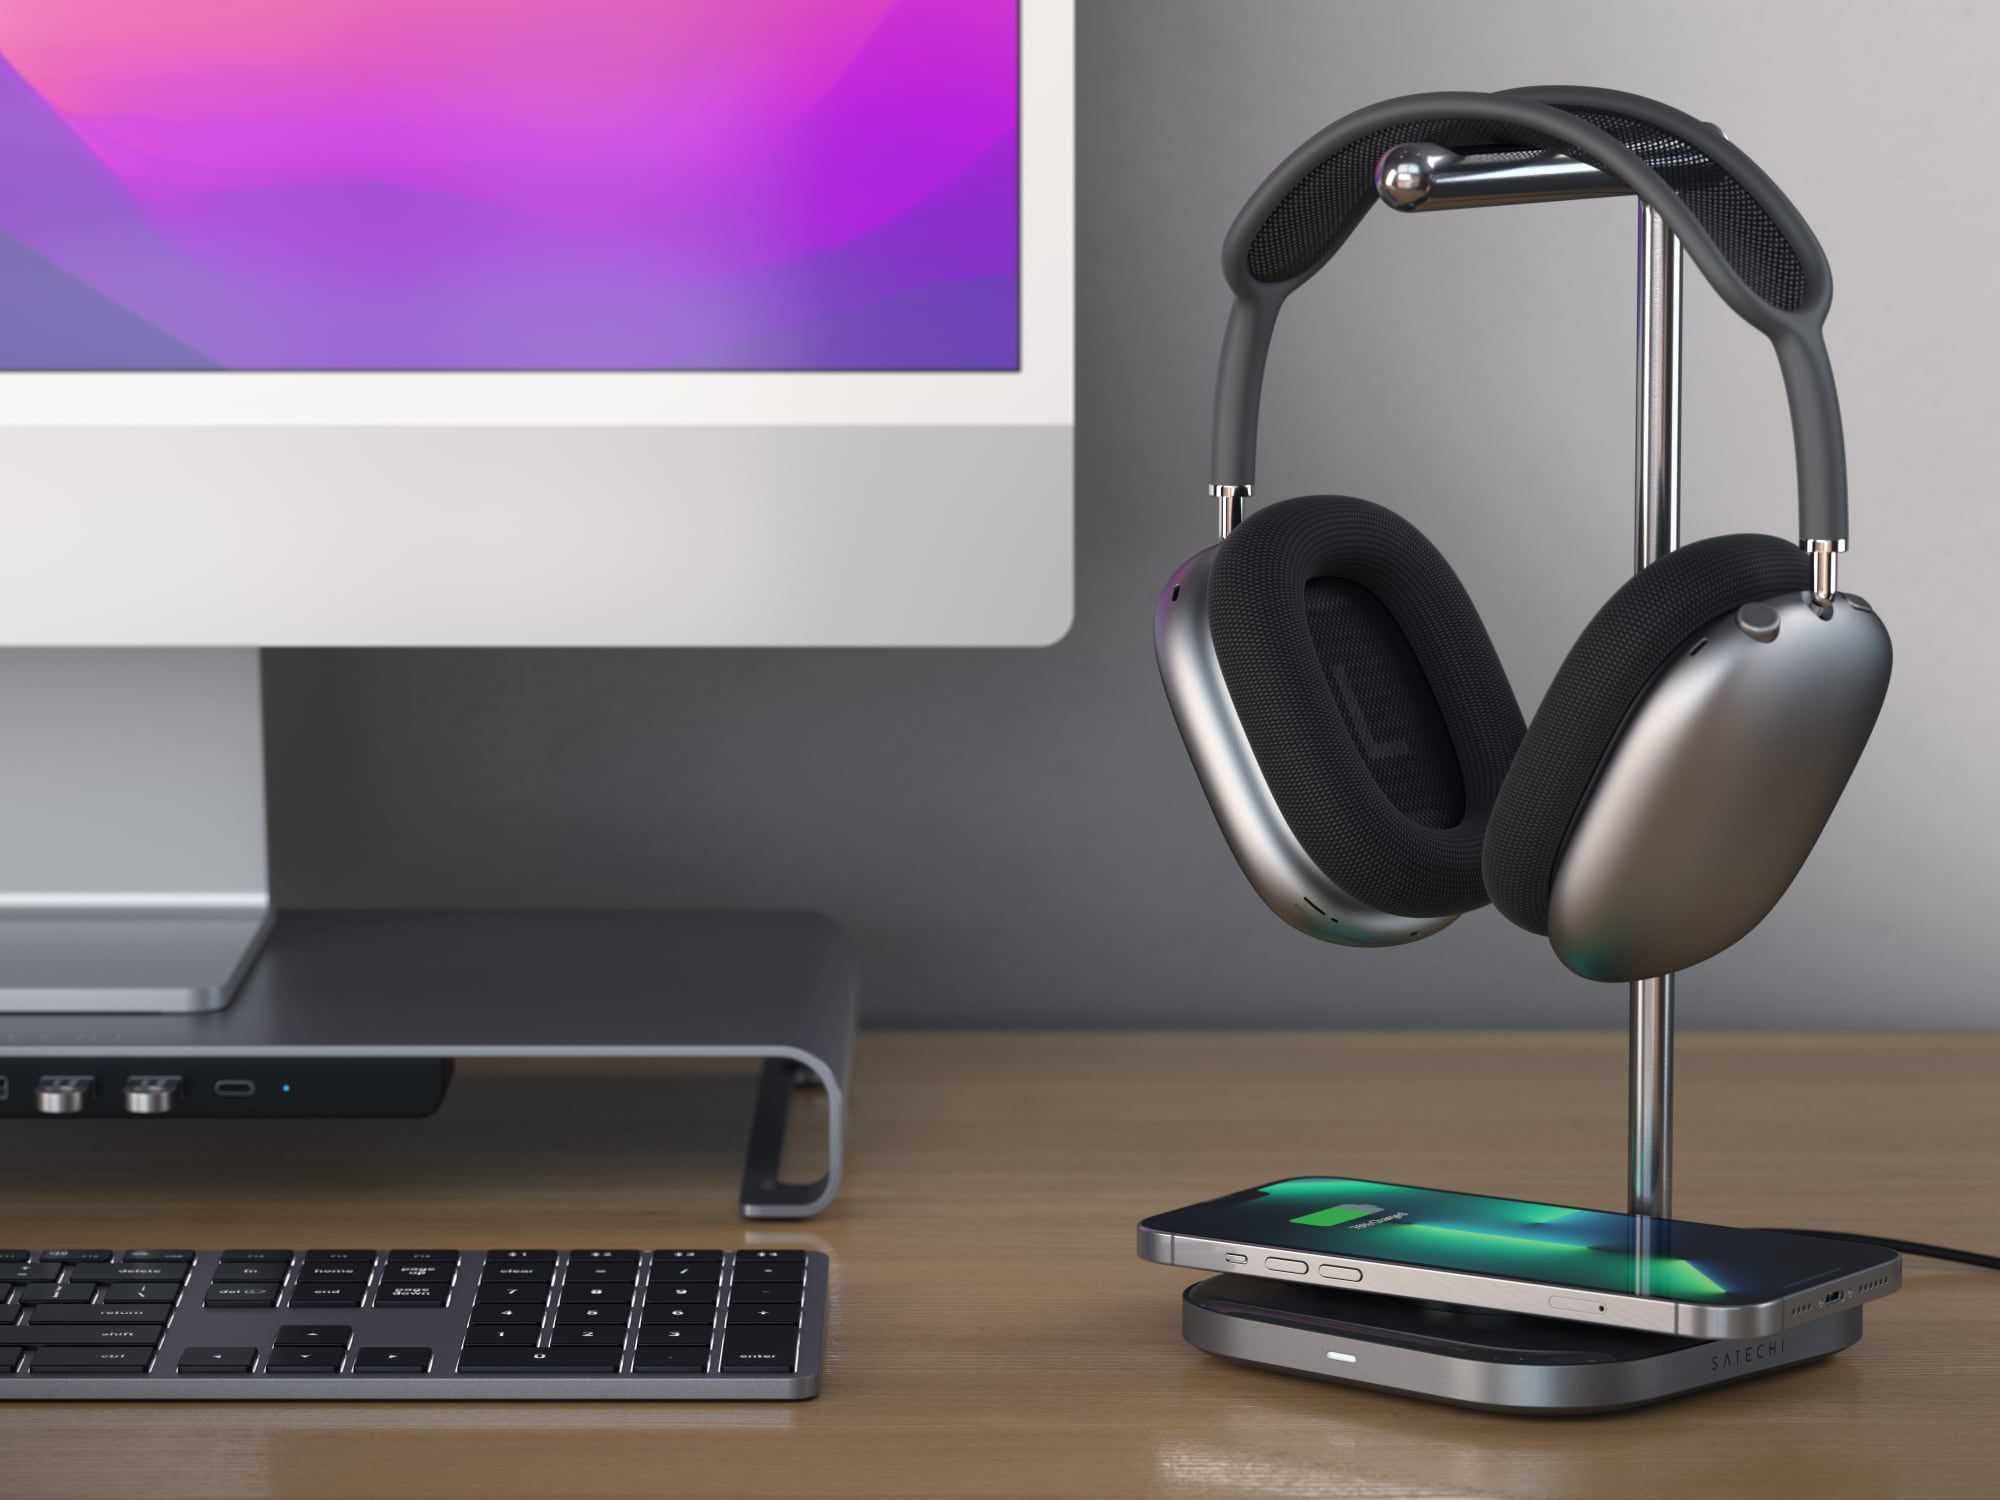 MacRumors Giveaway: Win an iPhone and Mac Accessory Pack From Satechi